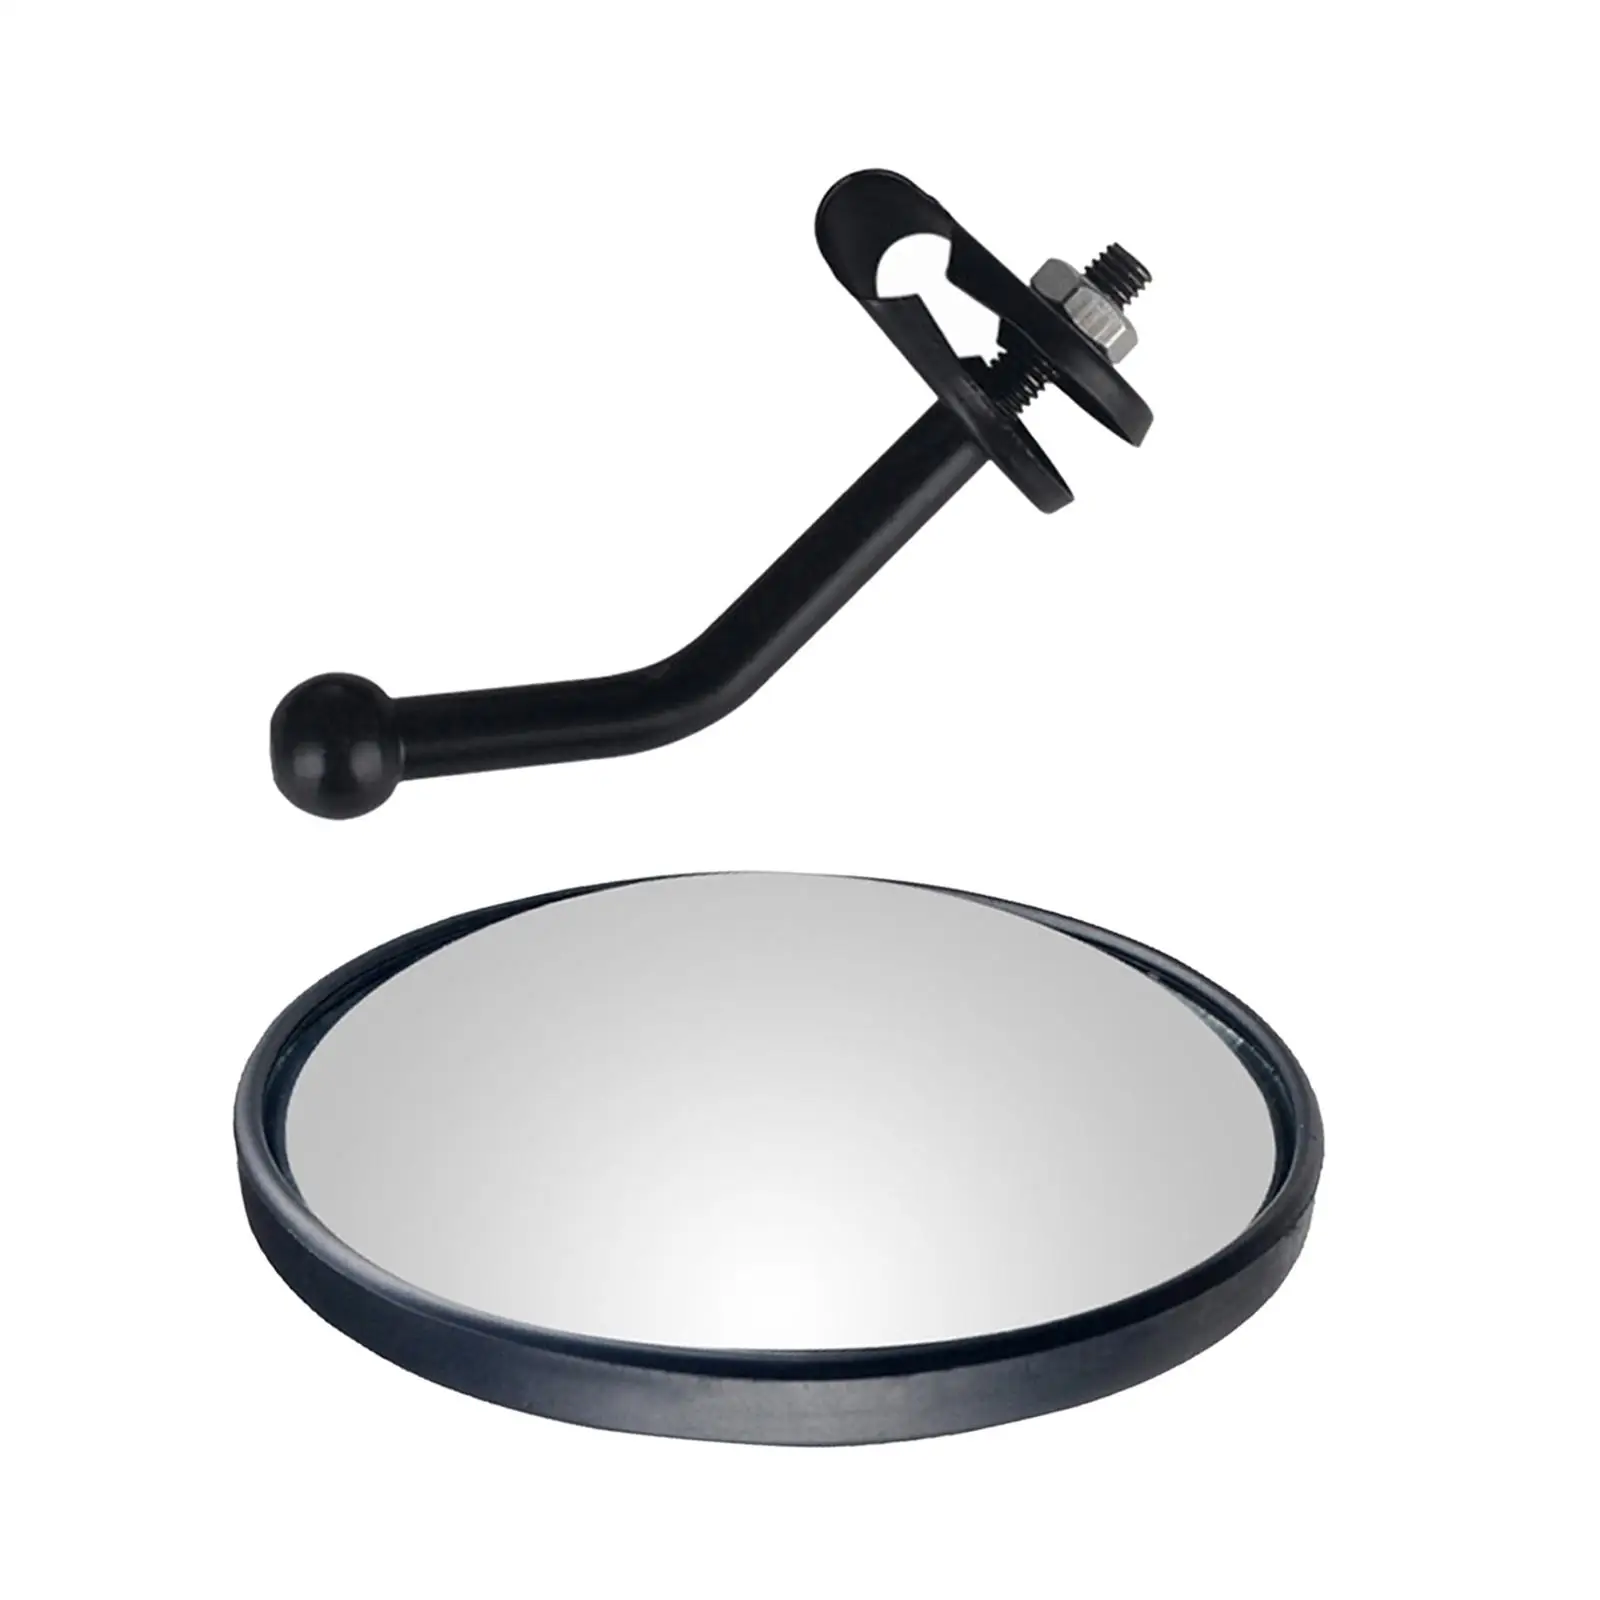 Adjustable Spot Mirrors, Car Auxiliary Accessories Large View Field Replacement Rearview Round Side Convex Mirror  Bus